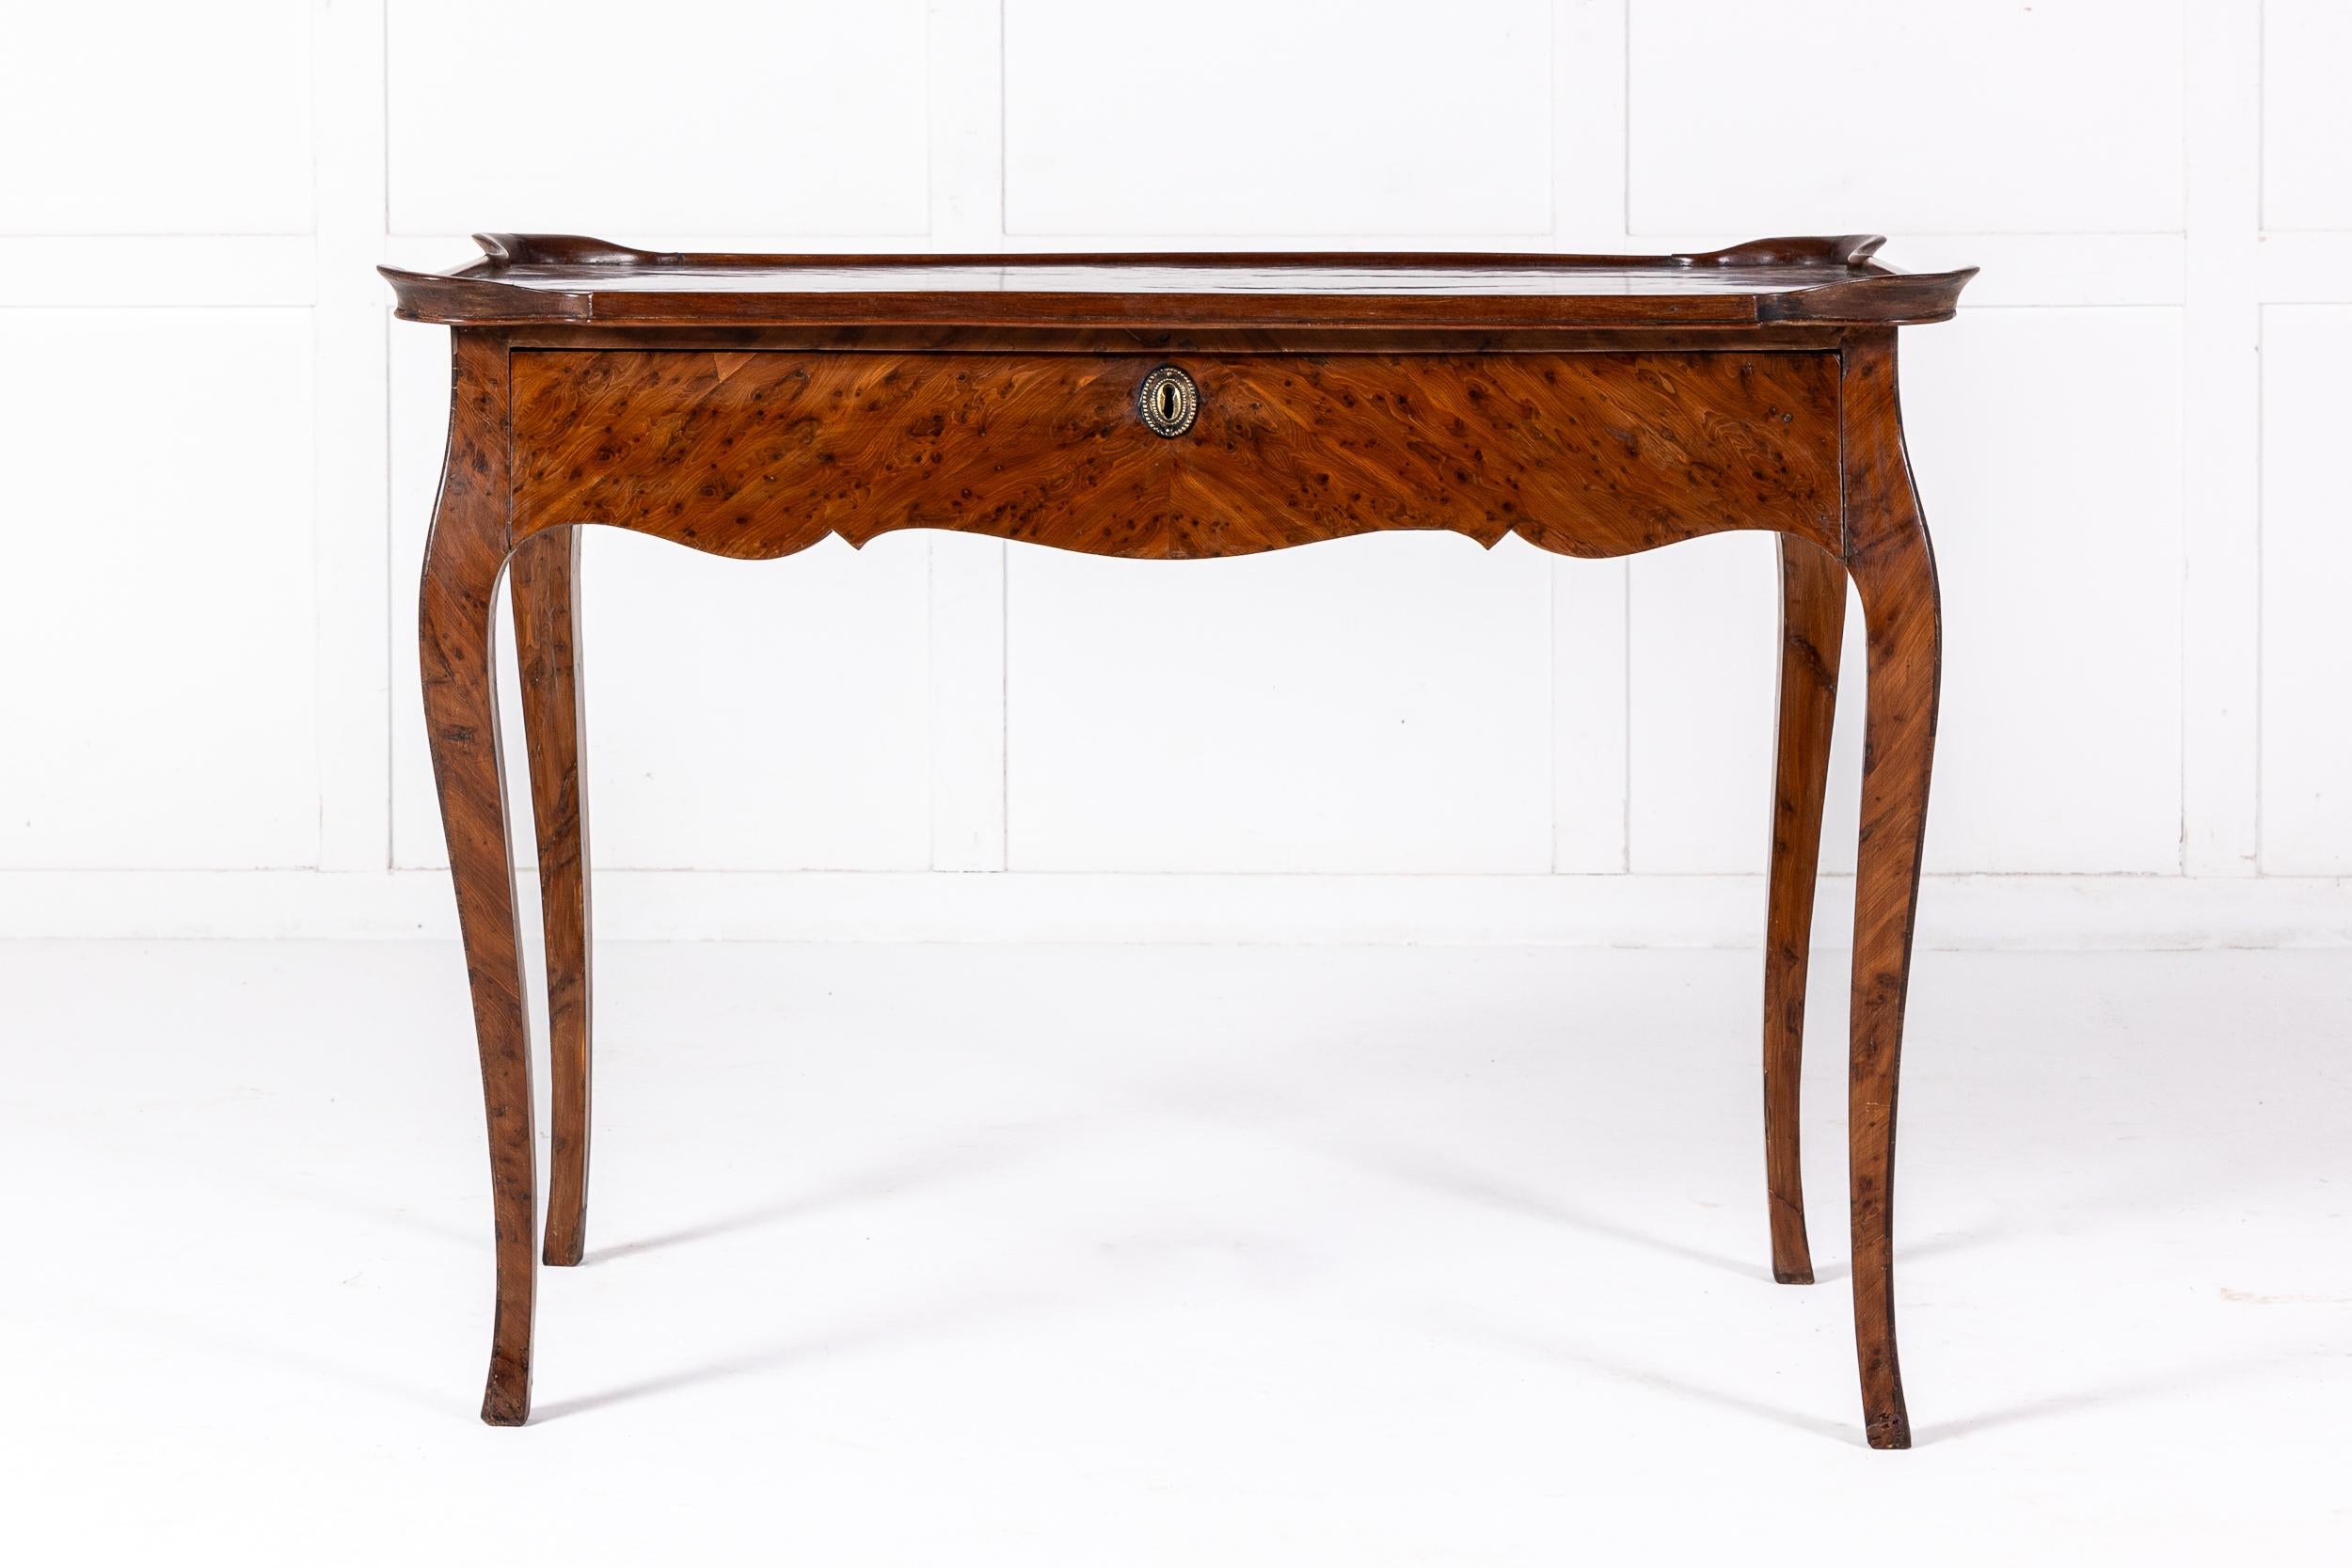 A Beautiful French Louis XVI Centre or Occasional Table in Burr Elm with Moulded Top.

This table is of delightful form with a shaped frieze and elegant cabriole legs. The top is shaped and moulded with four wells, one to each corner. The piece is